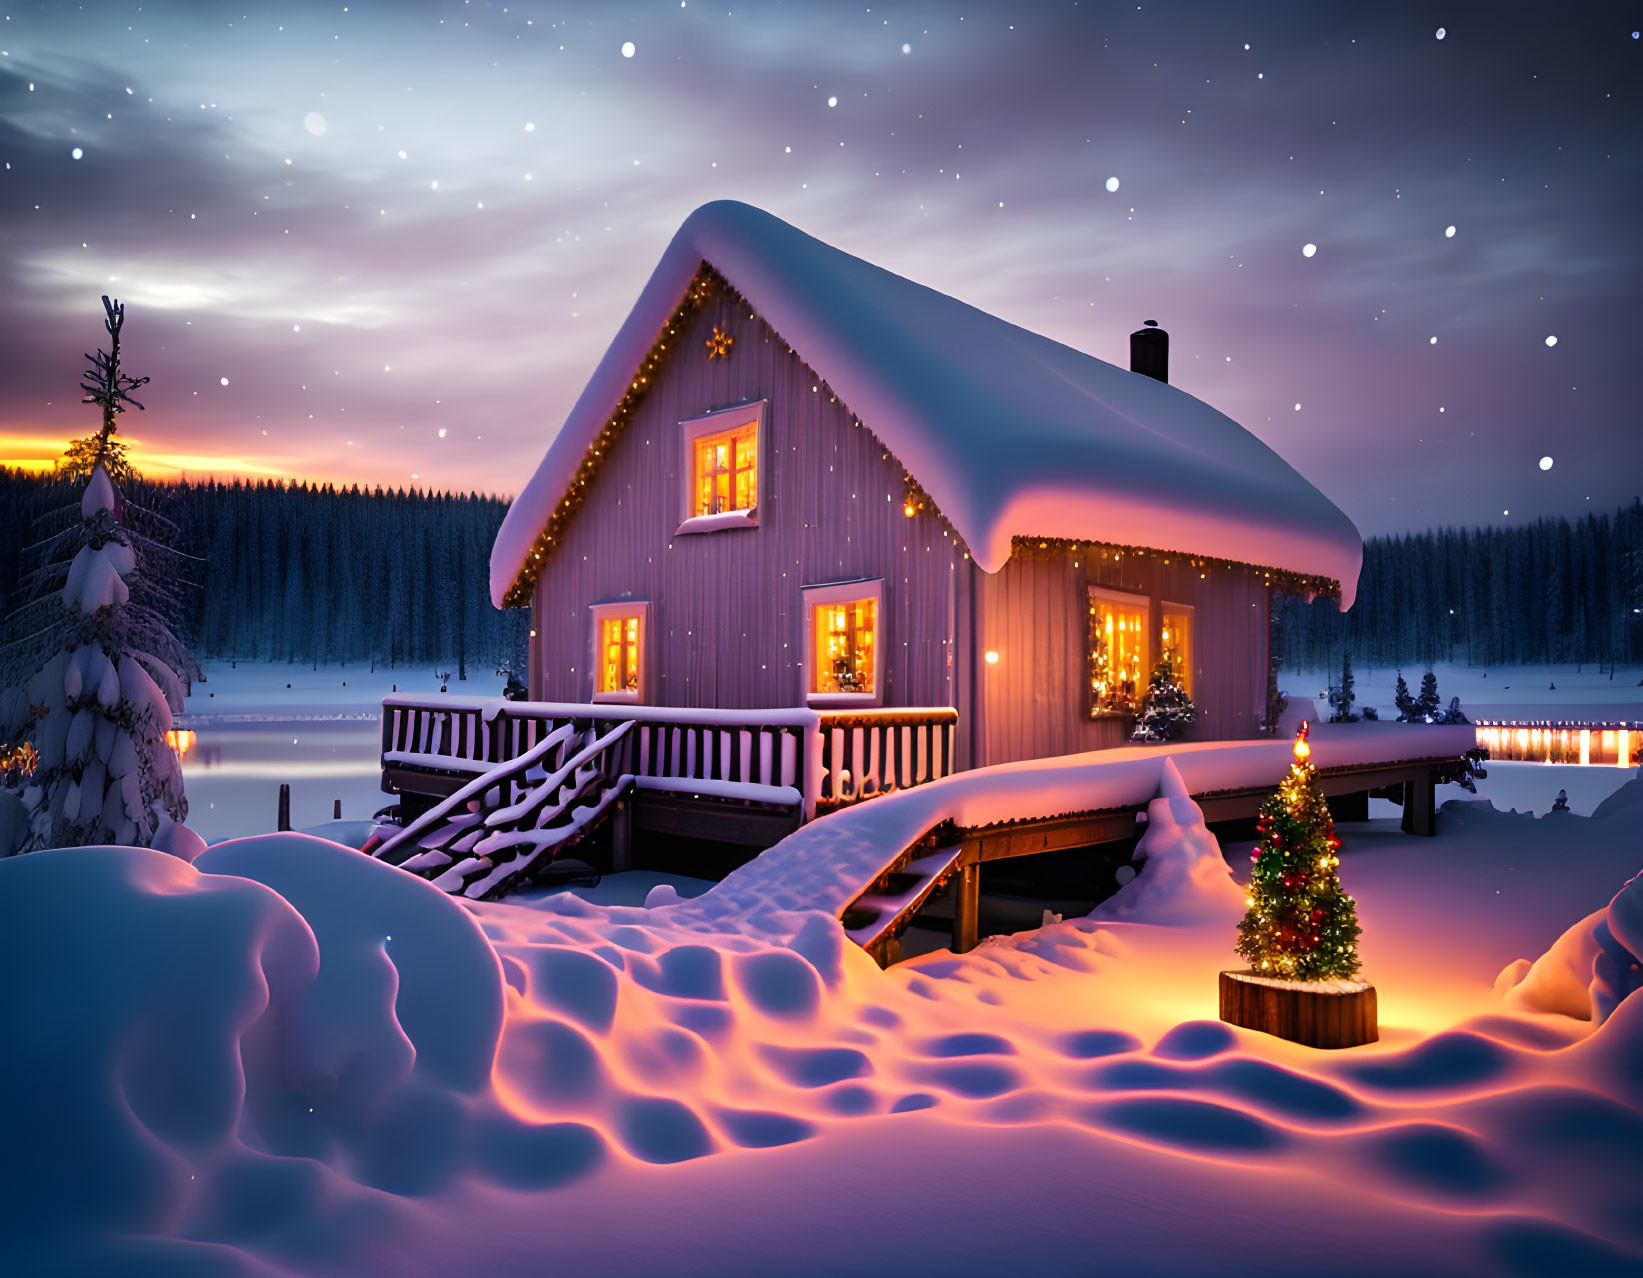 The house in Lapland